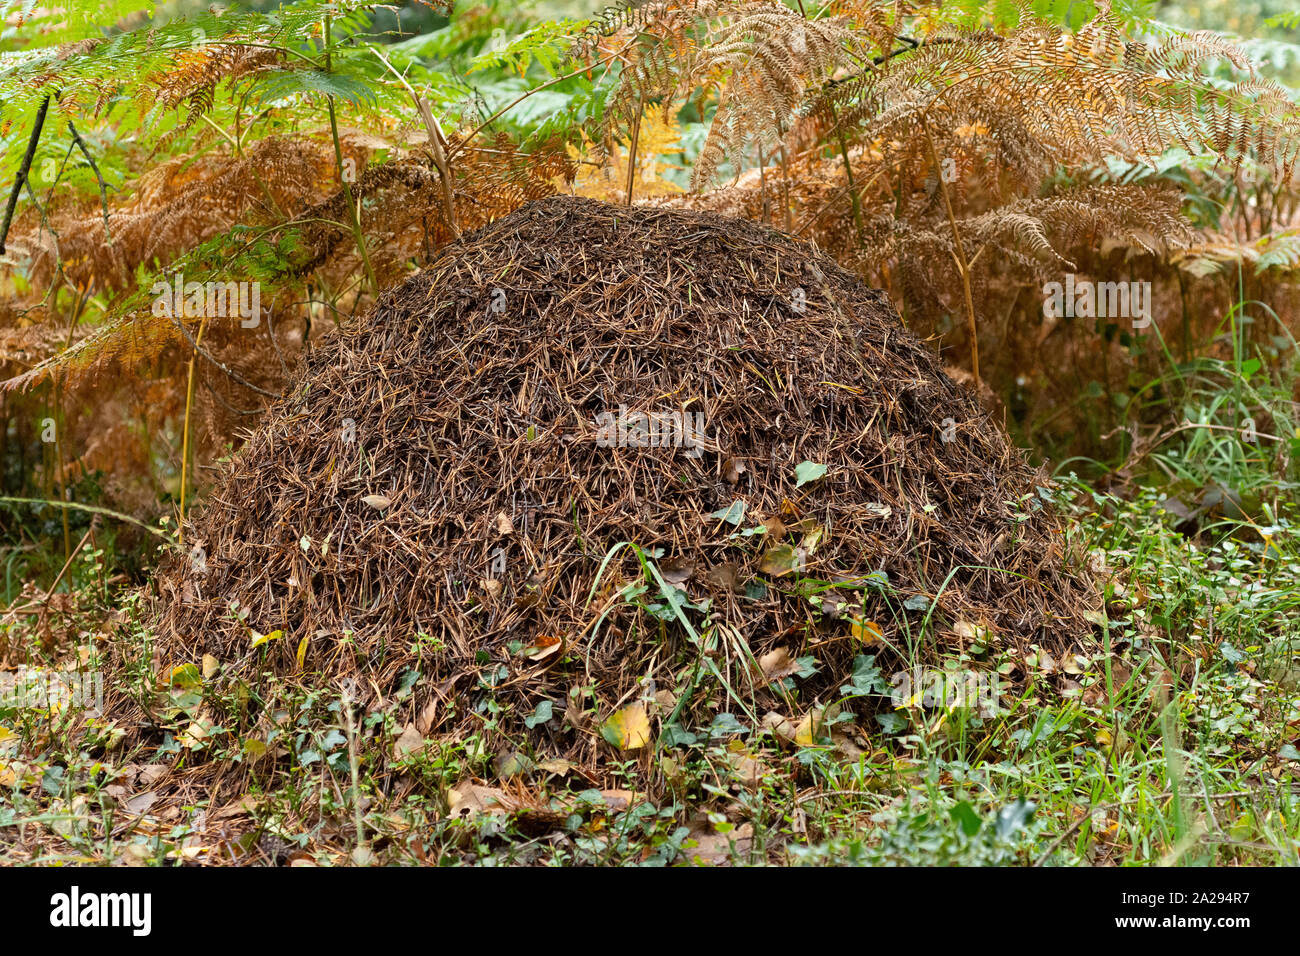 Ant hill created by wood ants in The New Forest, Hampshire, UK Stock Photo